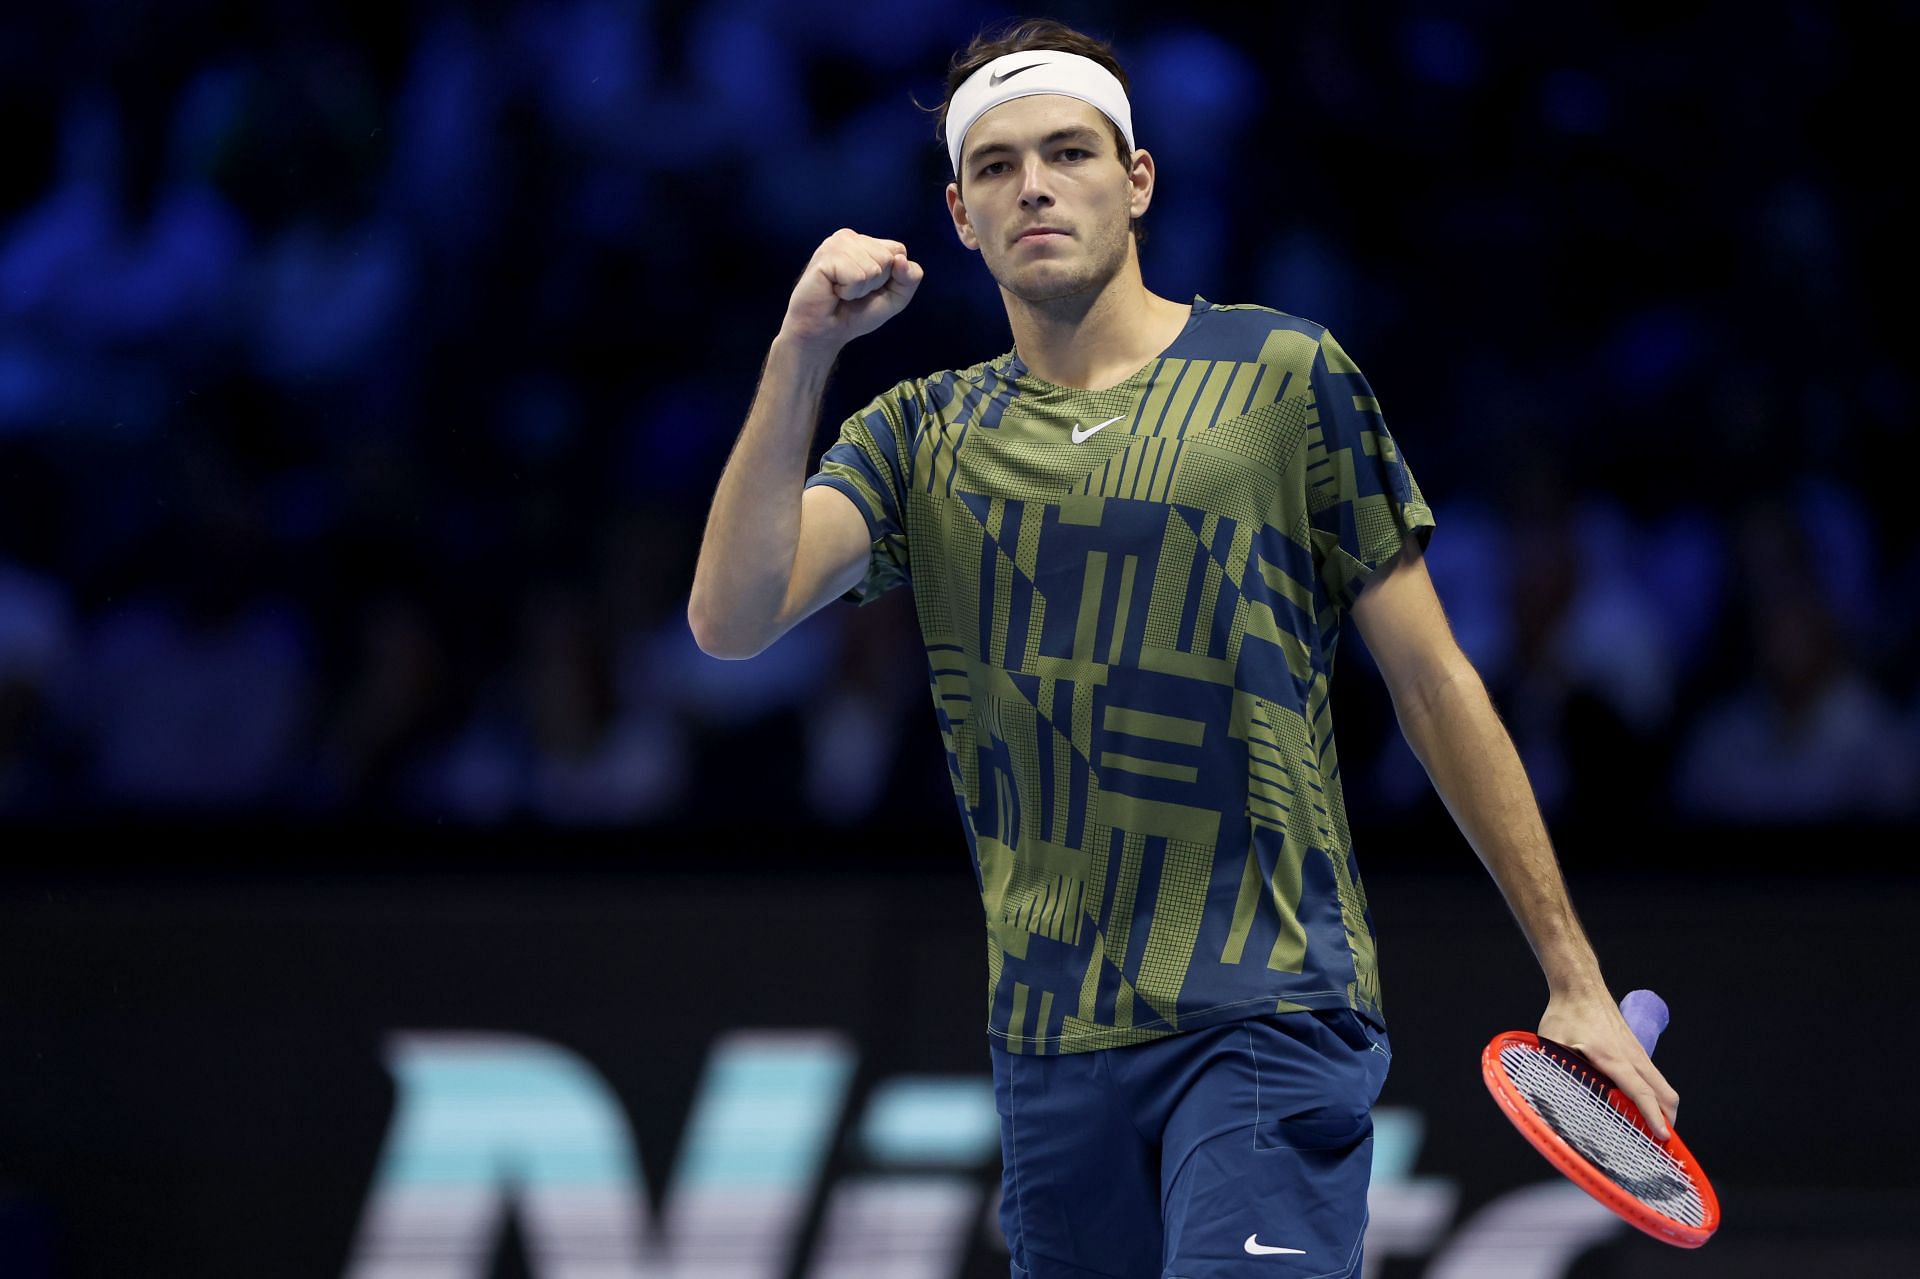 Nitto ATP Finals - Day One